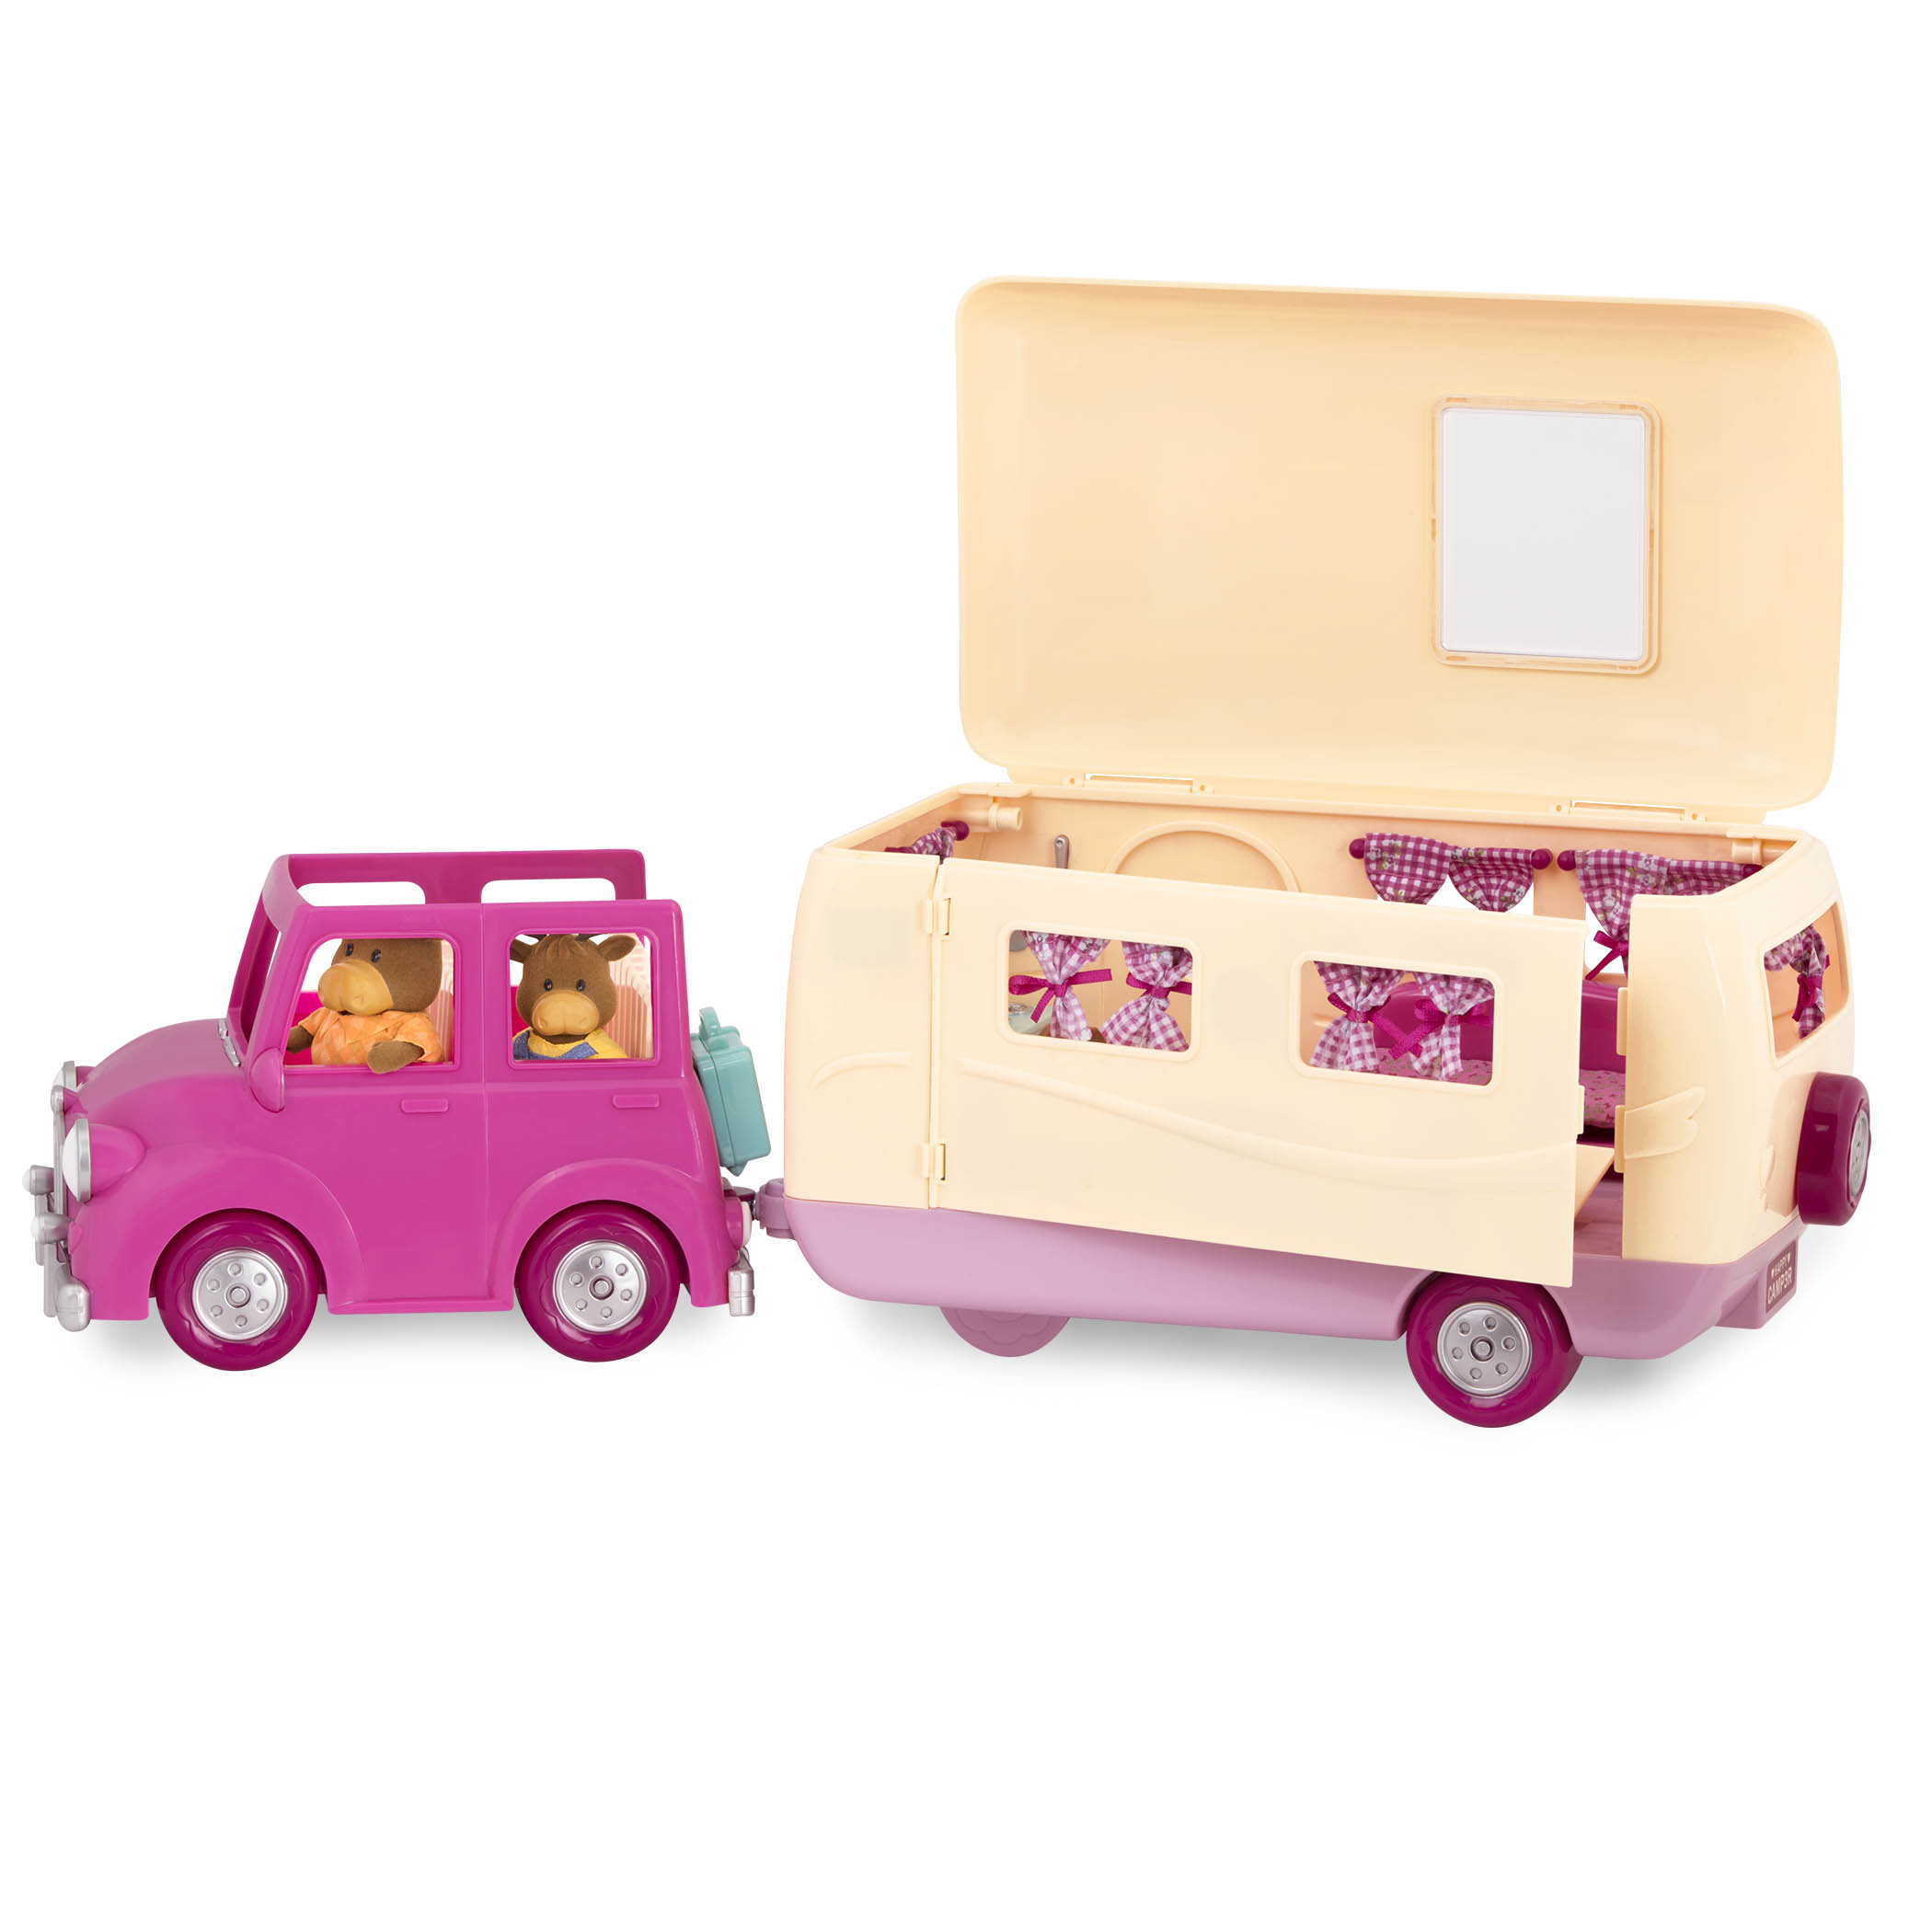 Toy camper playset with pink car and moose family inside.